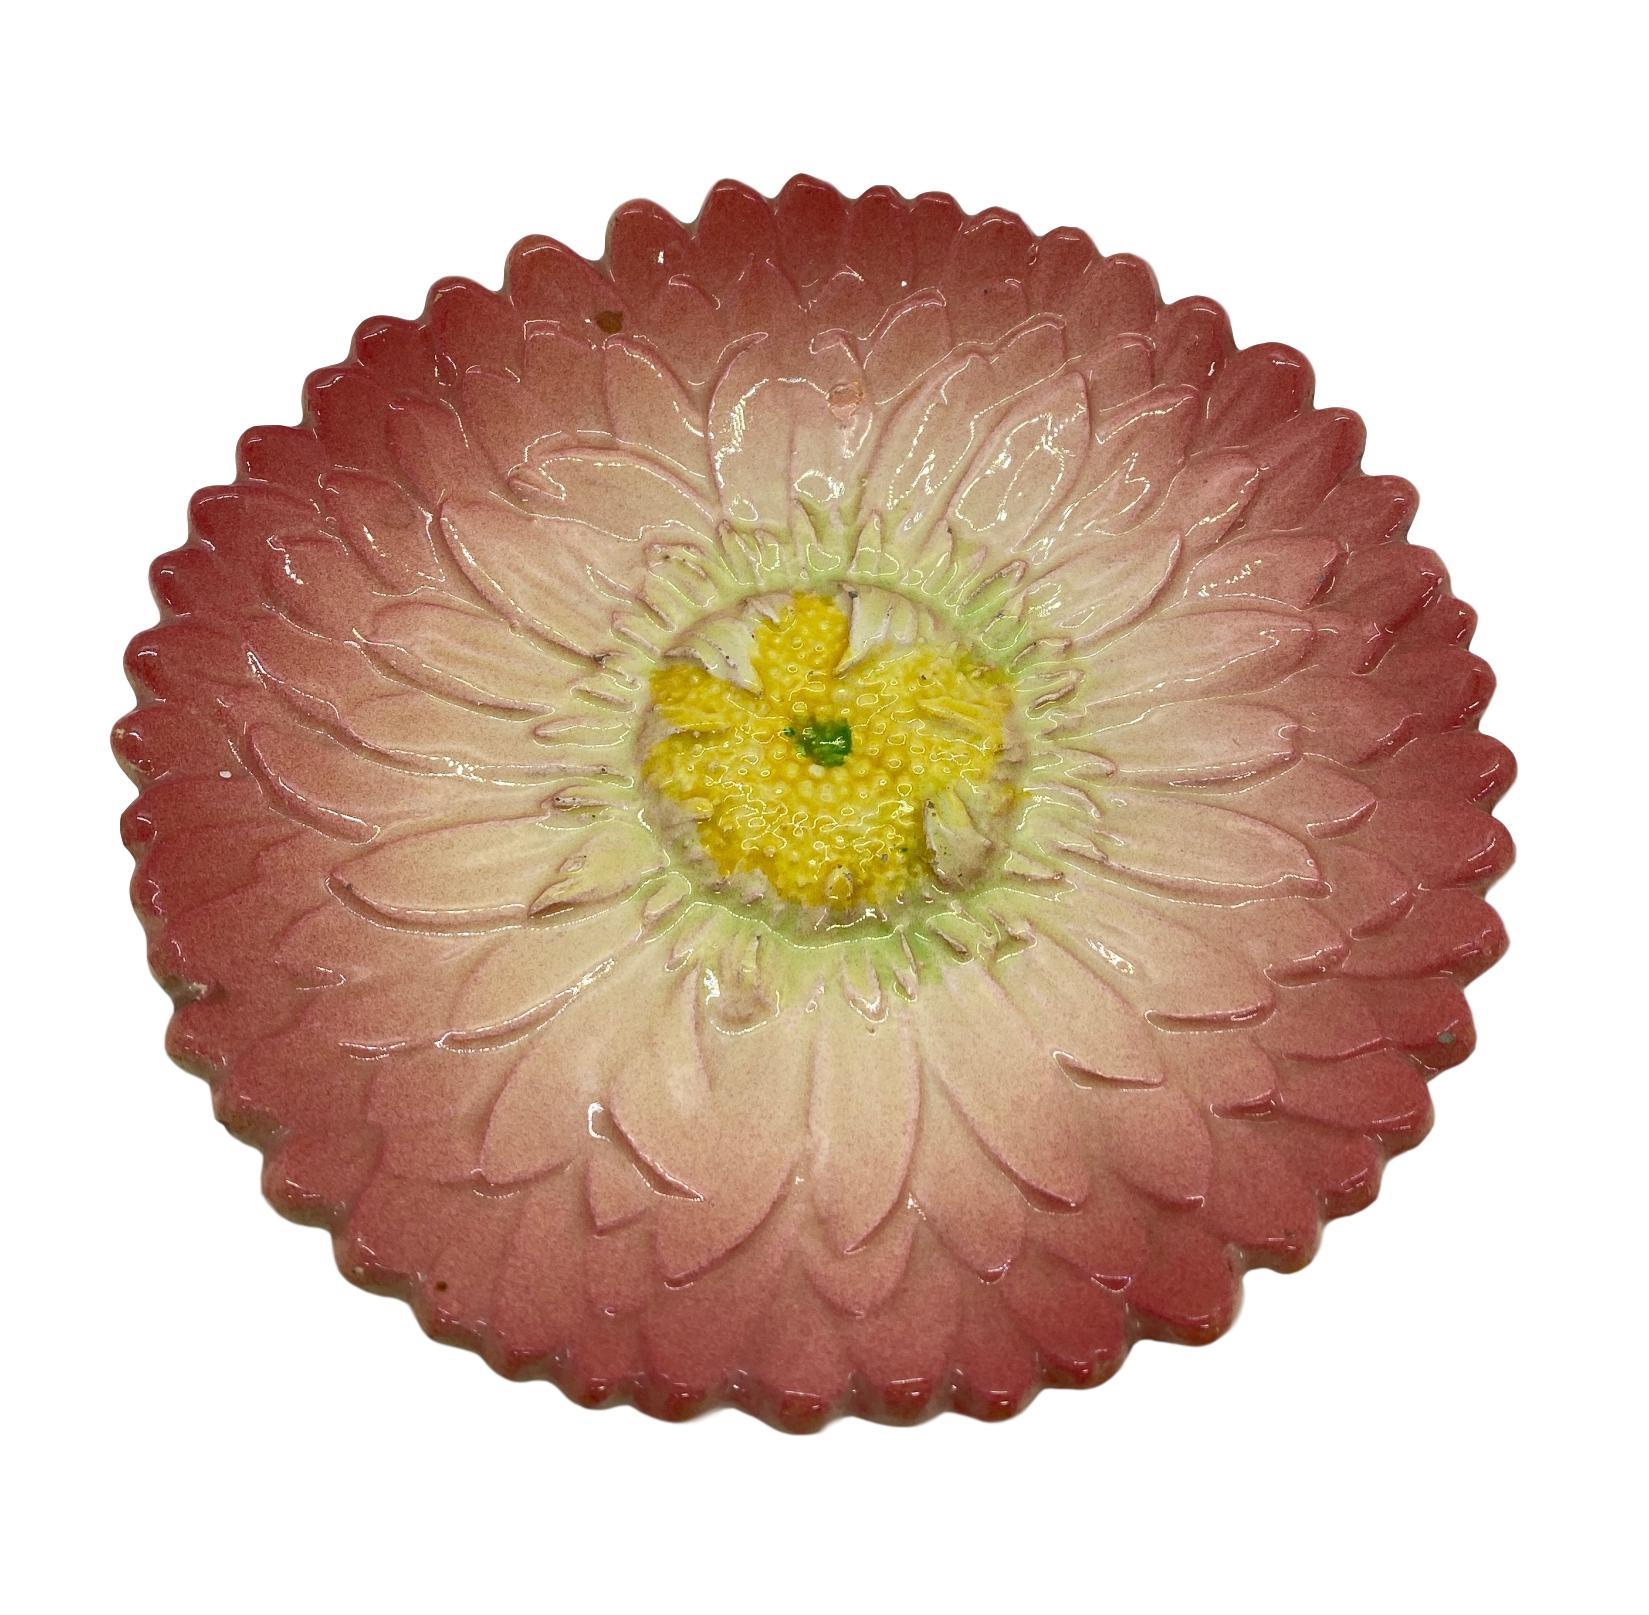 French Majolica Trompe L'oeil pink sunflower plate by Delphin Massier, circa 1870, measures: 8 inches, naturalistically relief molded as a French pink sunflower, signed to reverse, 'Delphin Massier Vallauris (A.M.).'
For over 28 years we have been